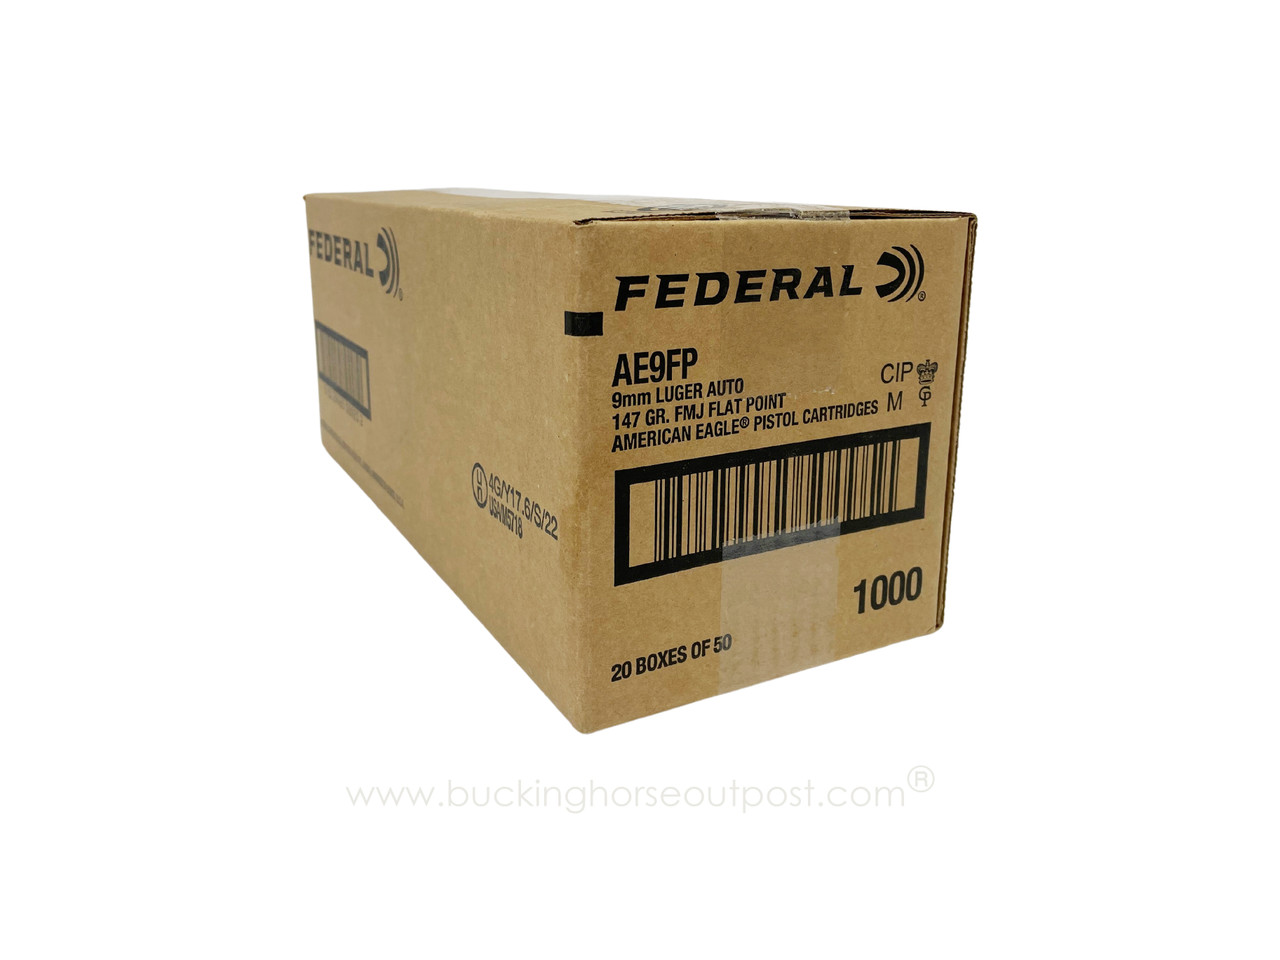 Federal American Eagle 9mm Luger 147 Gran Full Metal Jacket 1000rds Per Case (AE9FP)- FREE SHIPPING ON ORDERS OVER $175